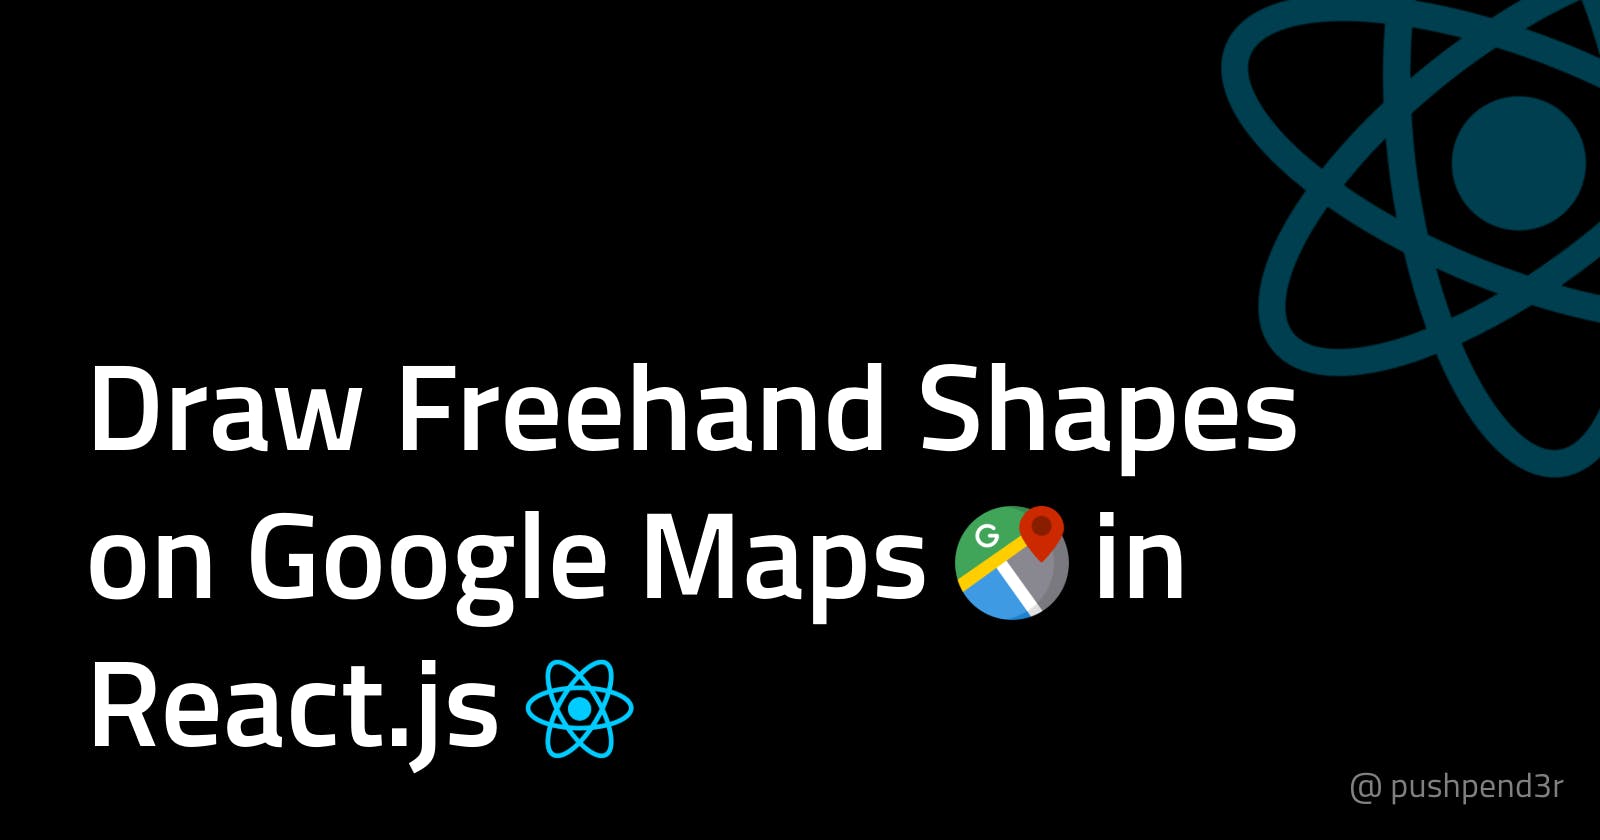 Draw Freehand Shapes on Google Maps in React.js | by @pushpend3r | #1